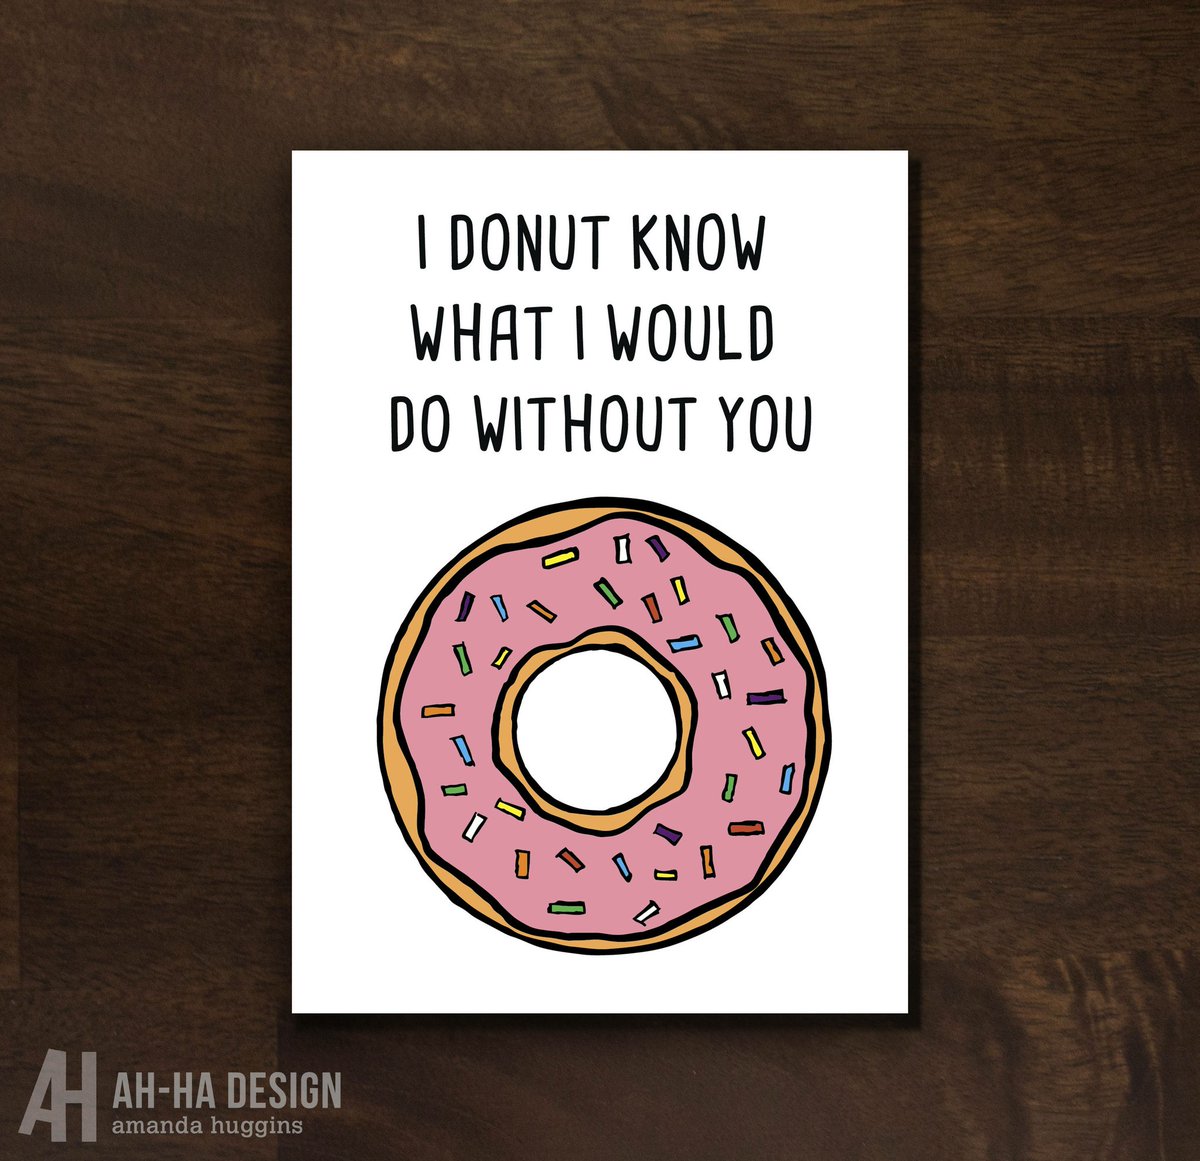 I Donut Know What I Would Do Without You Digital Download Card #etsy #cards #valentinesday #funnygreetingcard #donut #donutillustration etsy.me/2BPiQll